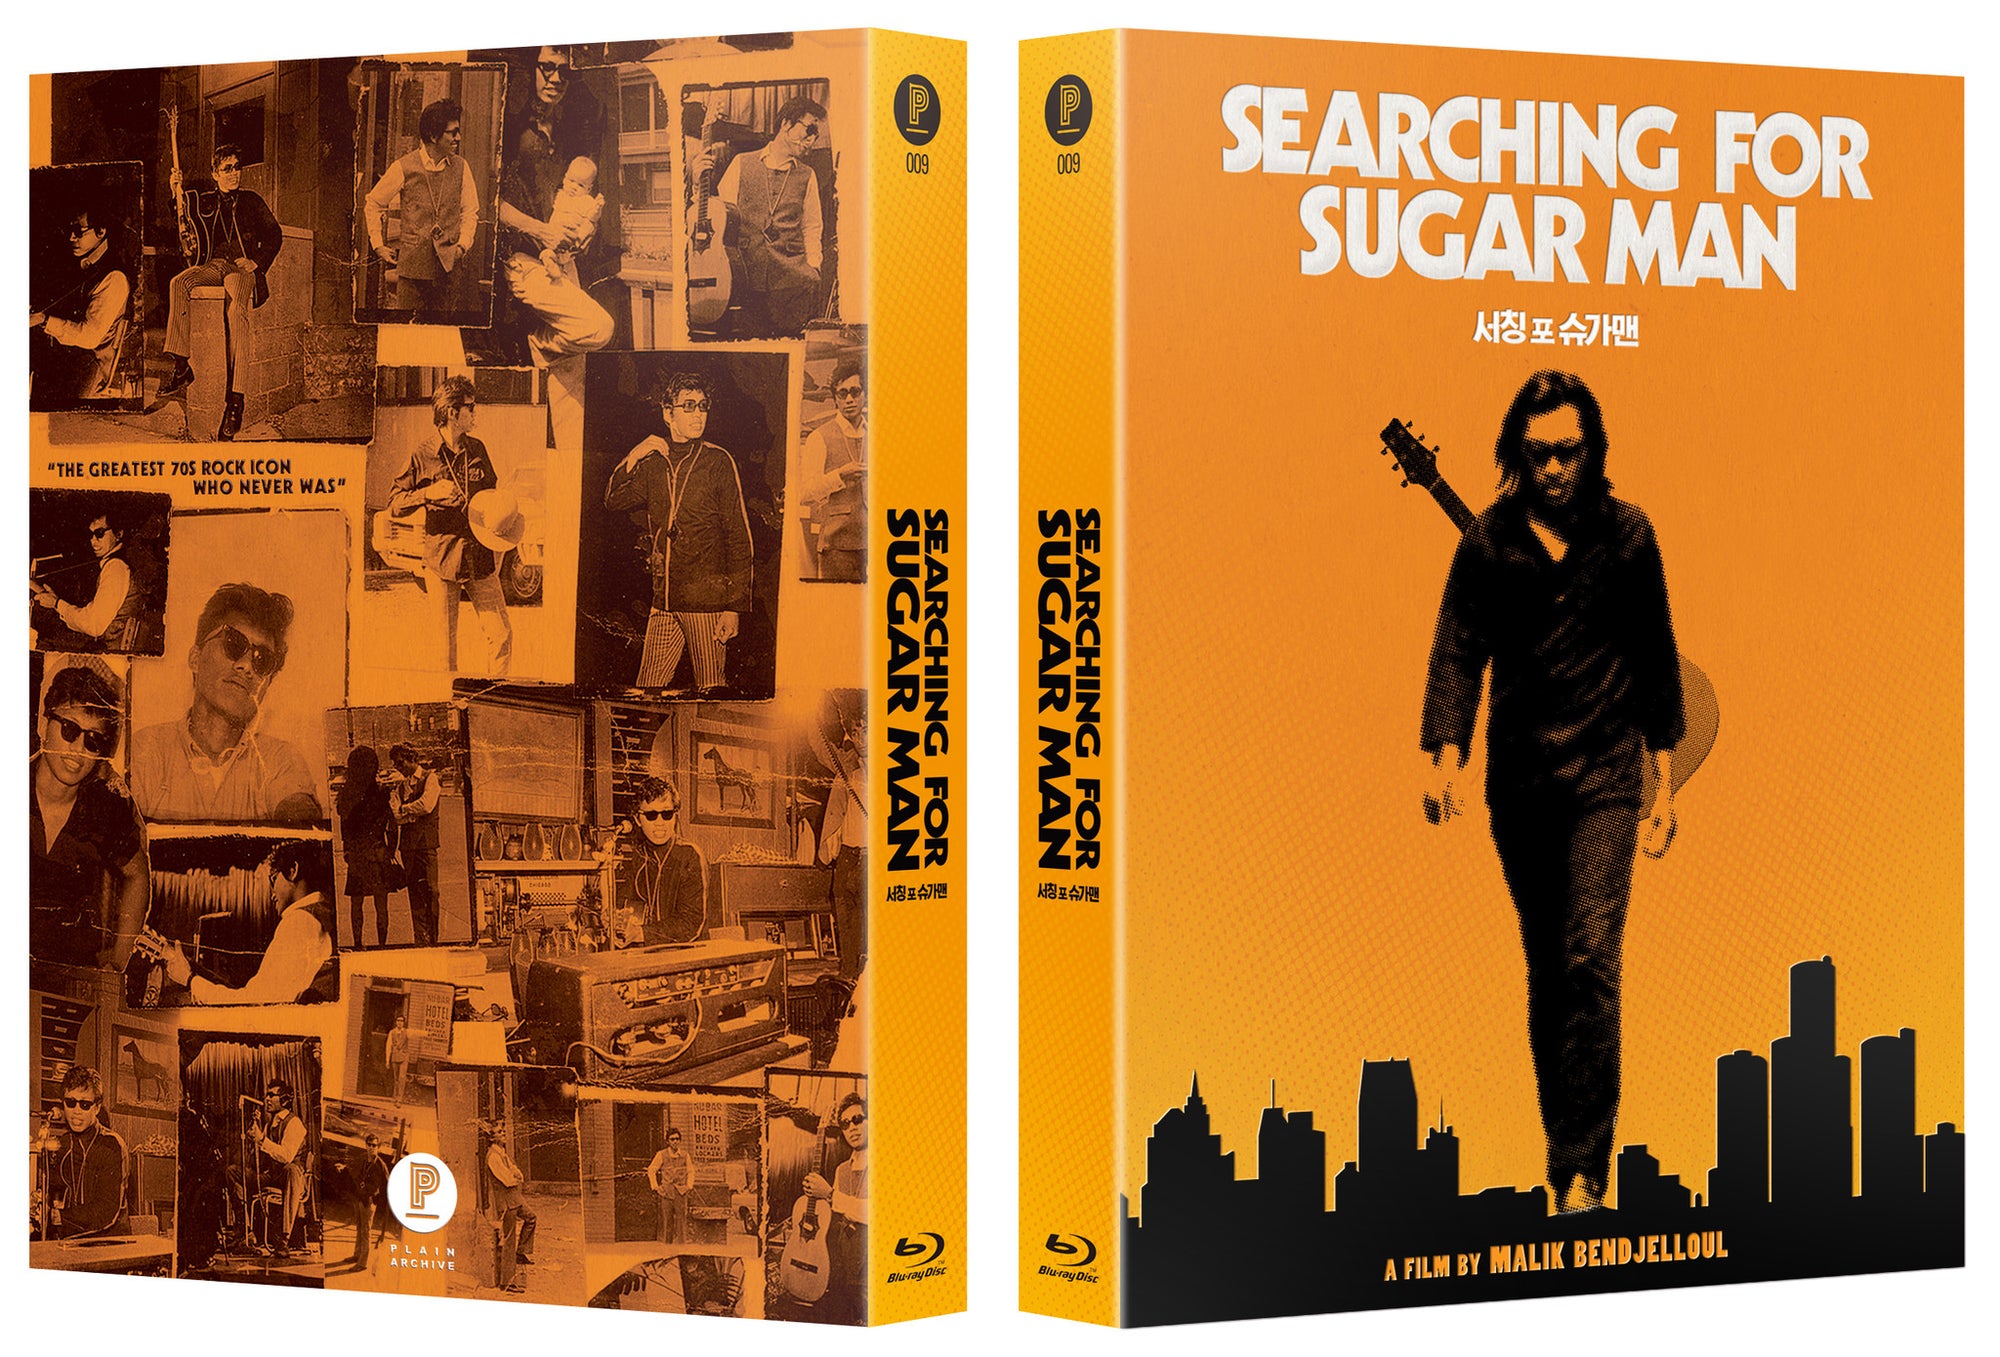 SEARCHING FOR SUGARMAN (Design A) : EXCLUSIVE & LIMITED EDITION (PA009)